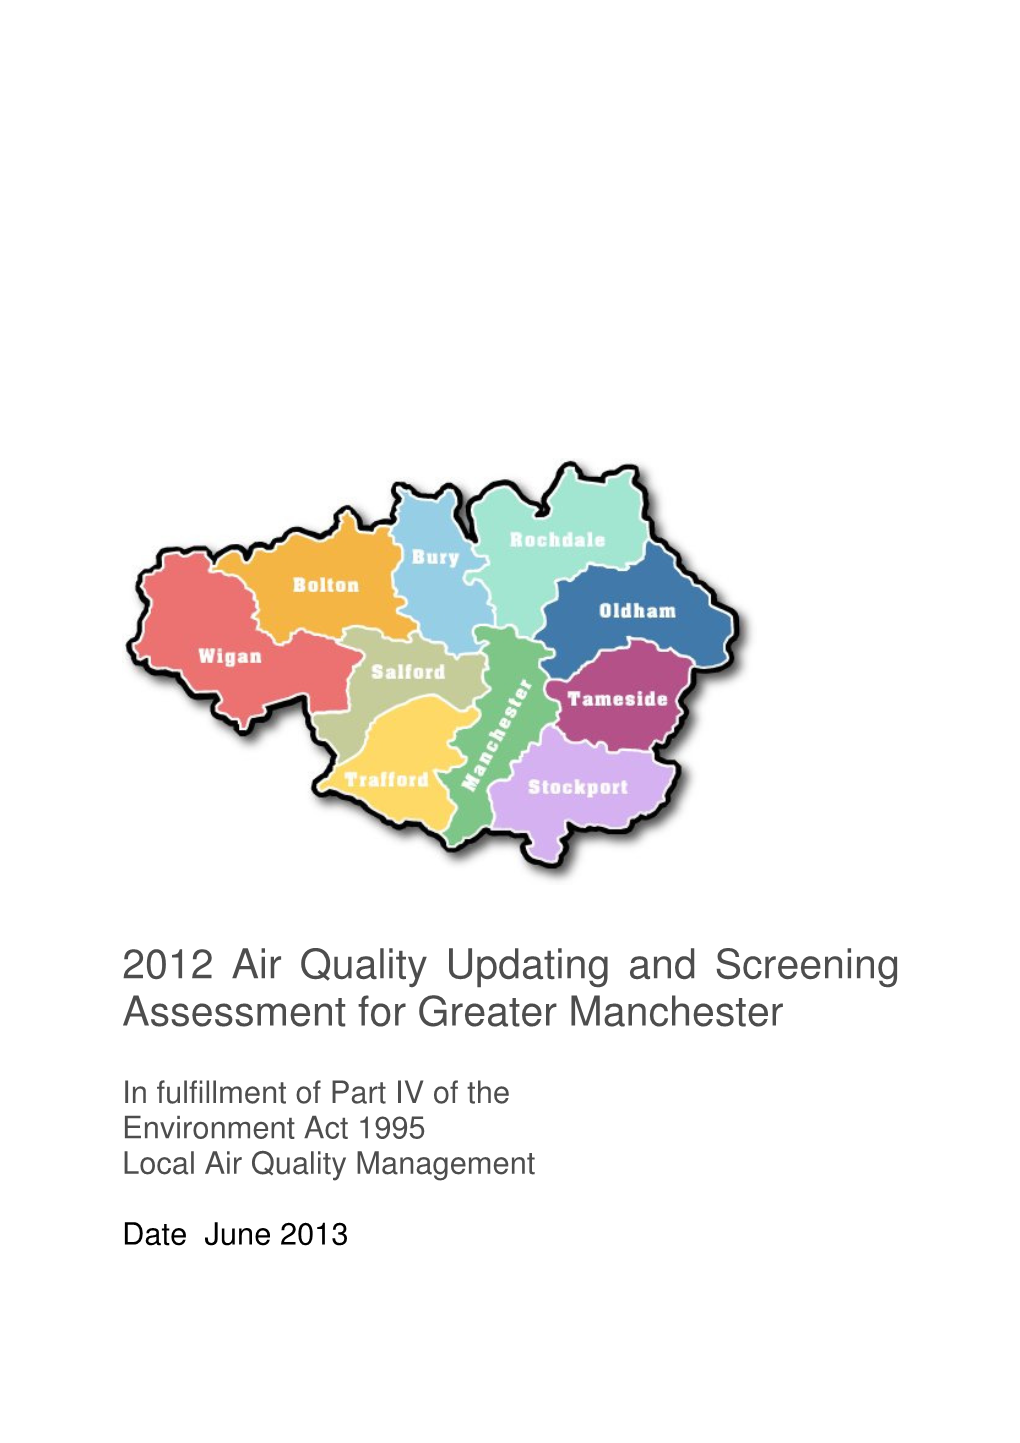 2012 Air Quality Updating and Screening Assessment for Greater Manchester